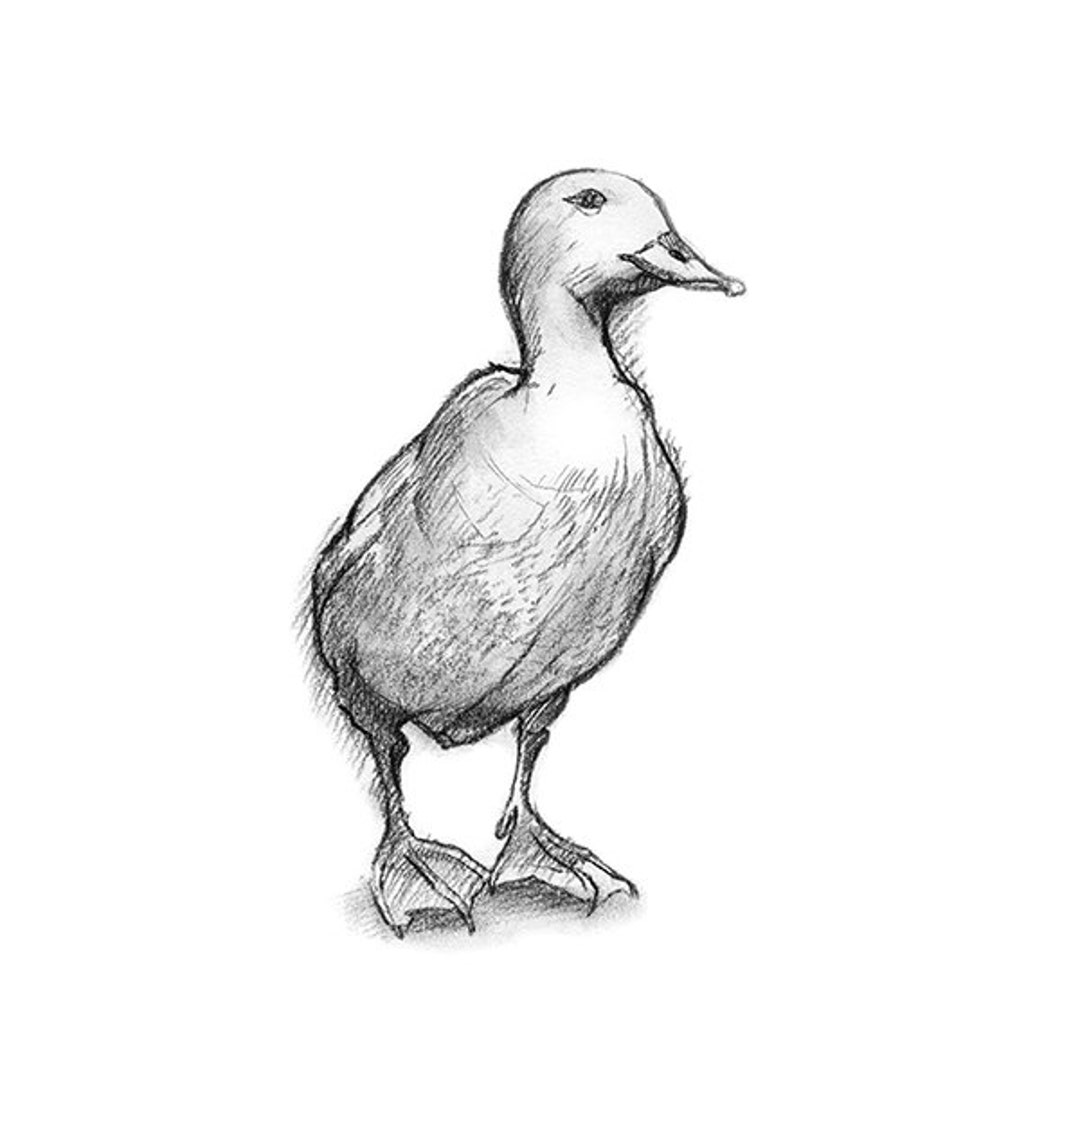 2000 Duckling Drawing Stock Photos Pictures  RoyaltyFree Images   iStock